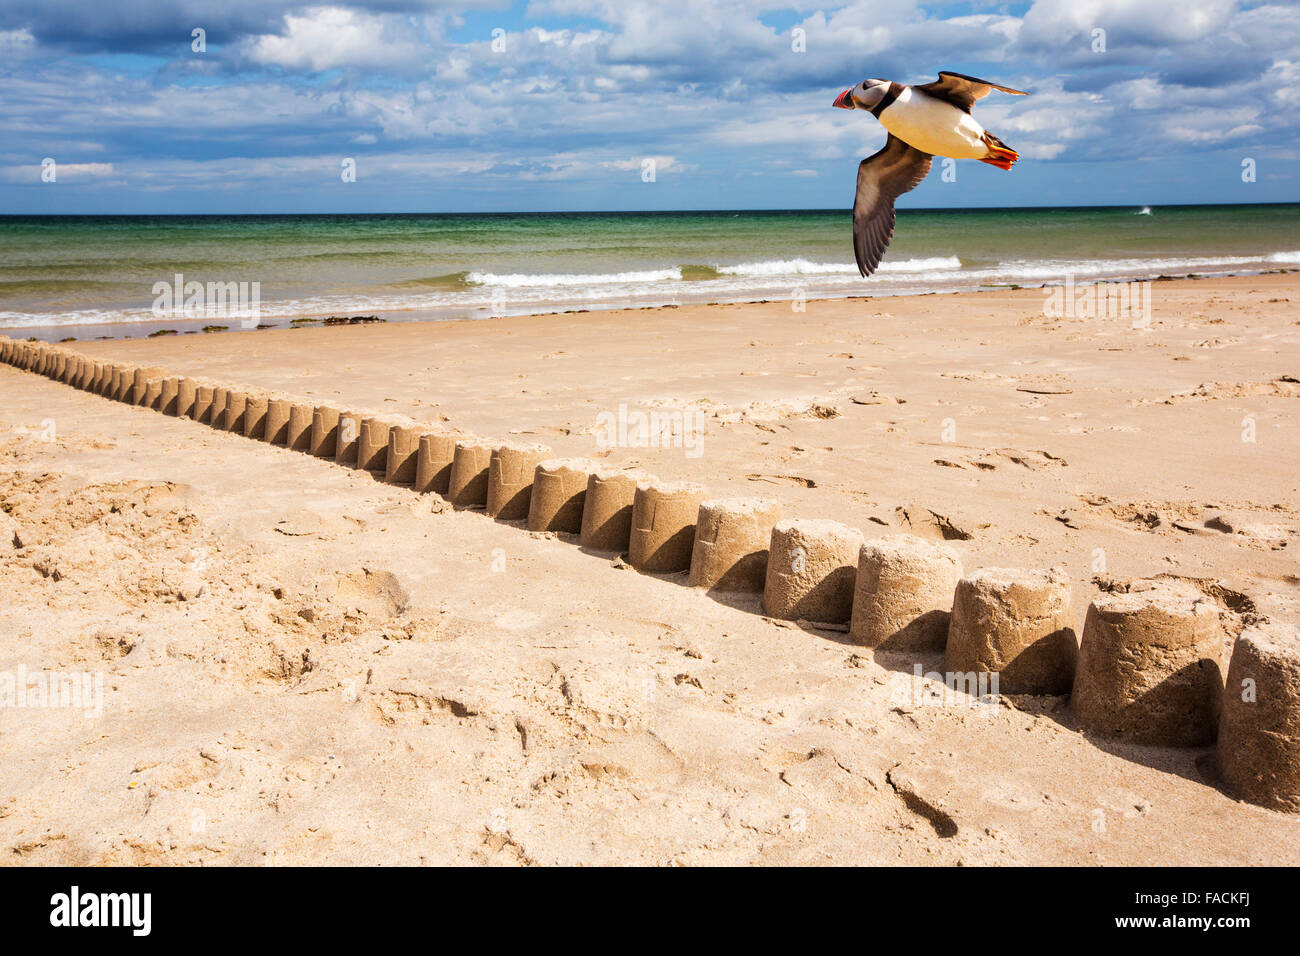 A line of sandcastles on a beach in Northumberland, UK with a Puffin flying over. Stock Photo